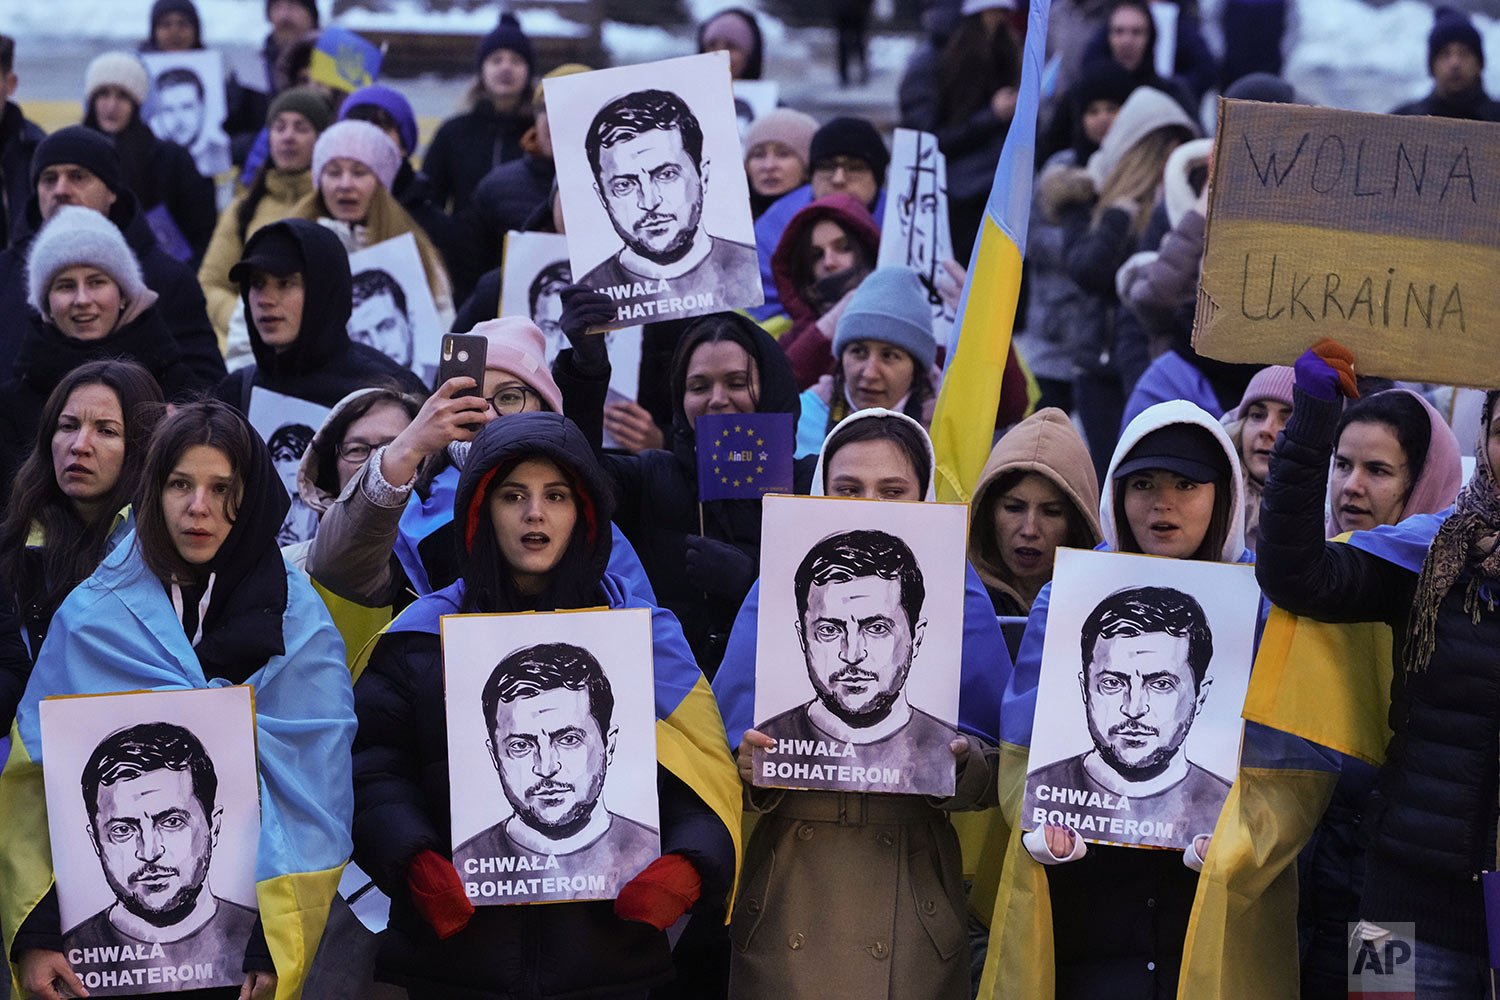  People hold portraits of Ukrainian President Volodymyr Zelenskyy during an anti-war rally in front of the Palace of Culture and Science in Warsaw, Poland, Saturday, April 2, 2022. (AP Photo/Czarek Sokolowski) 